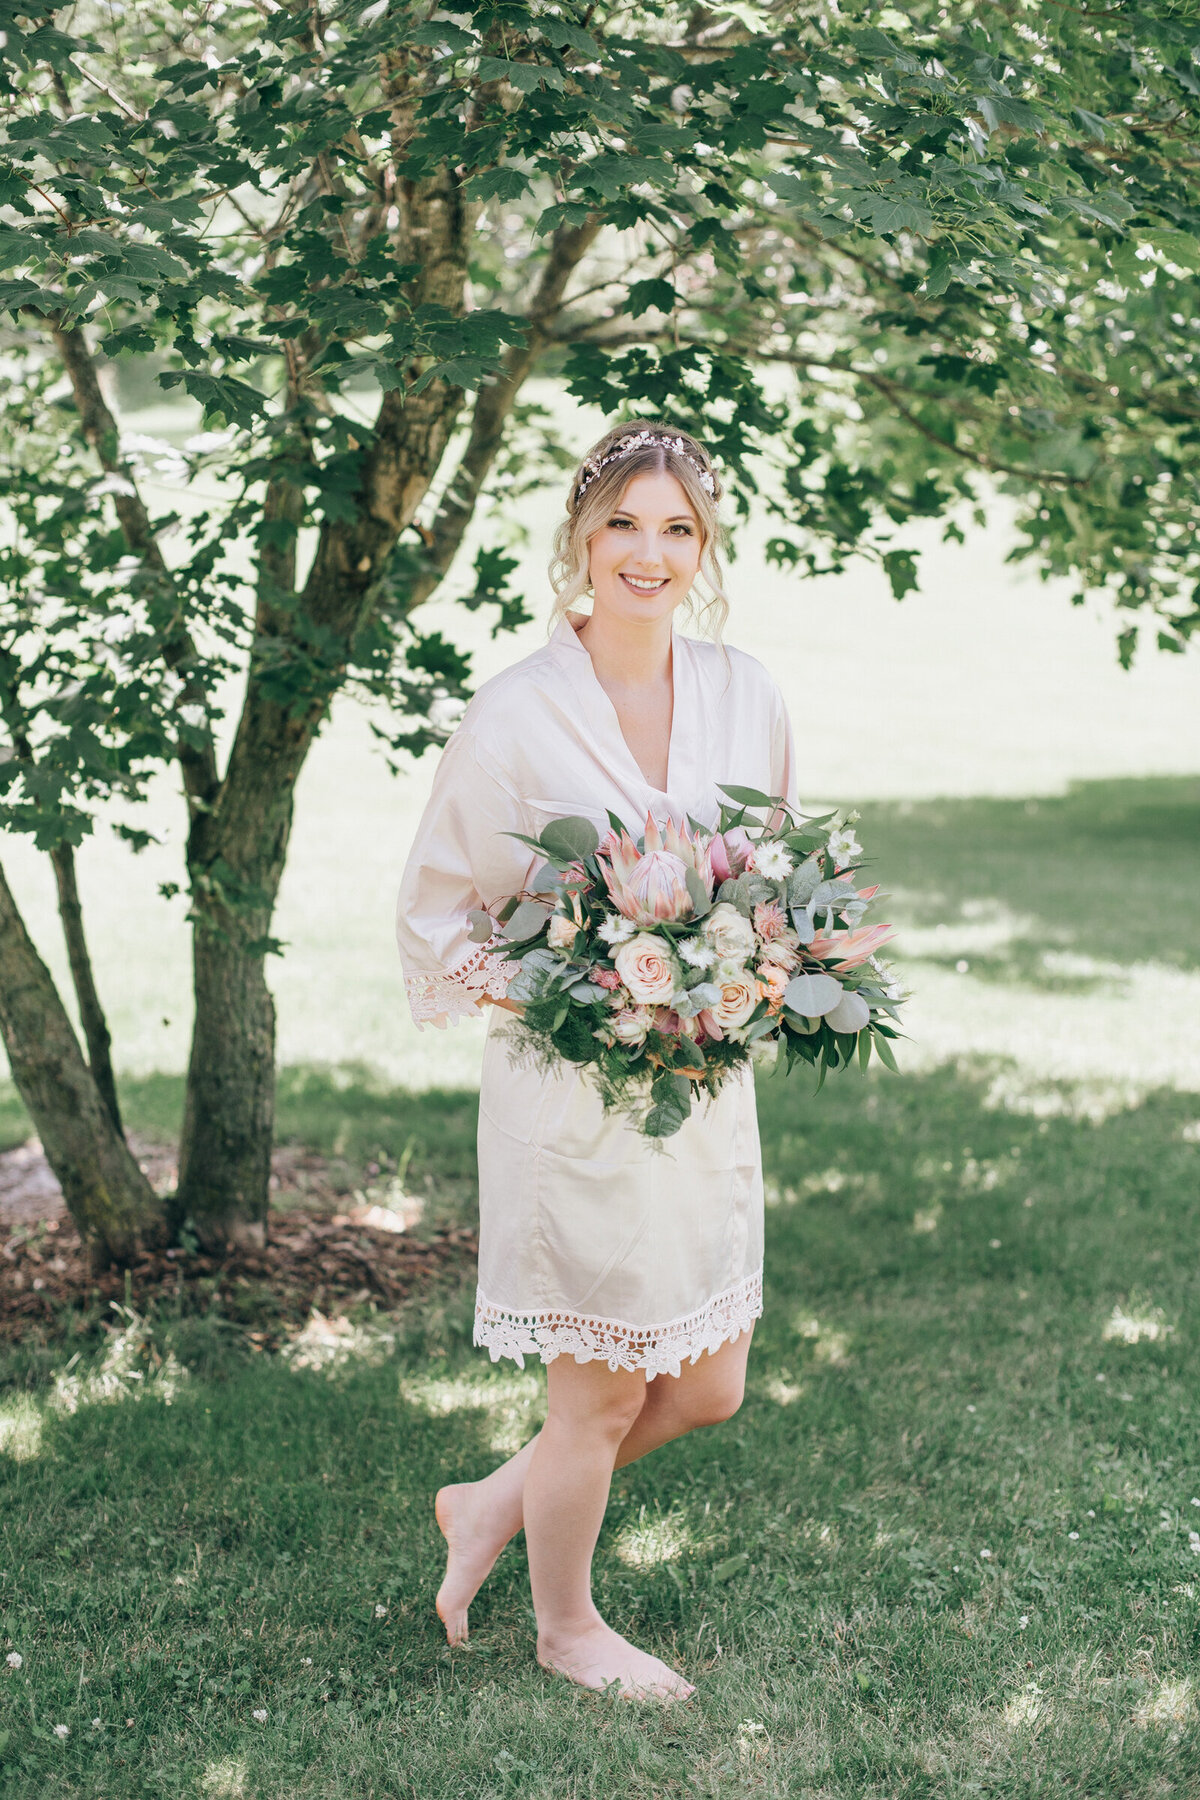 A bride in a pink robe posing with her big, whimsical wedding bouquet